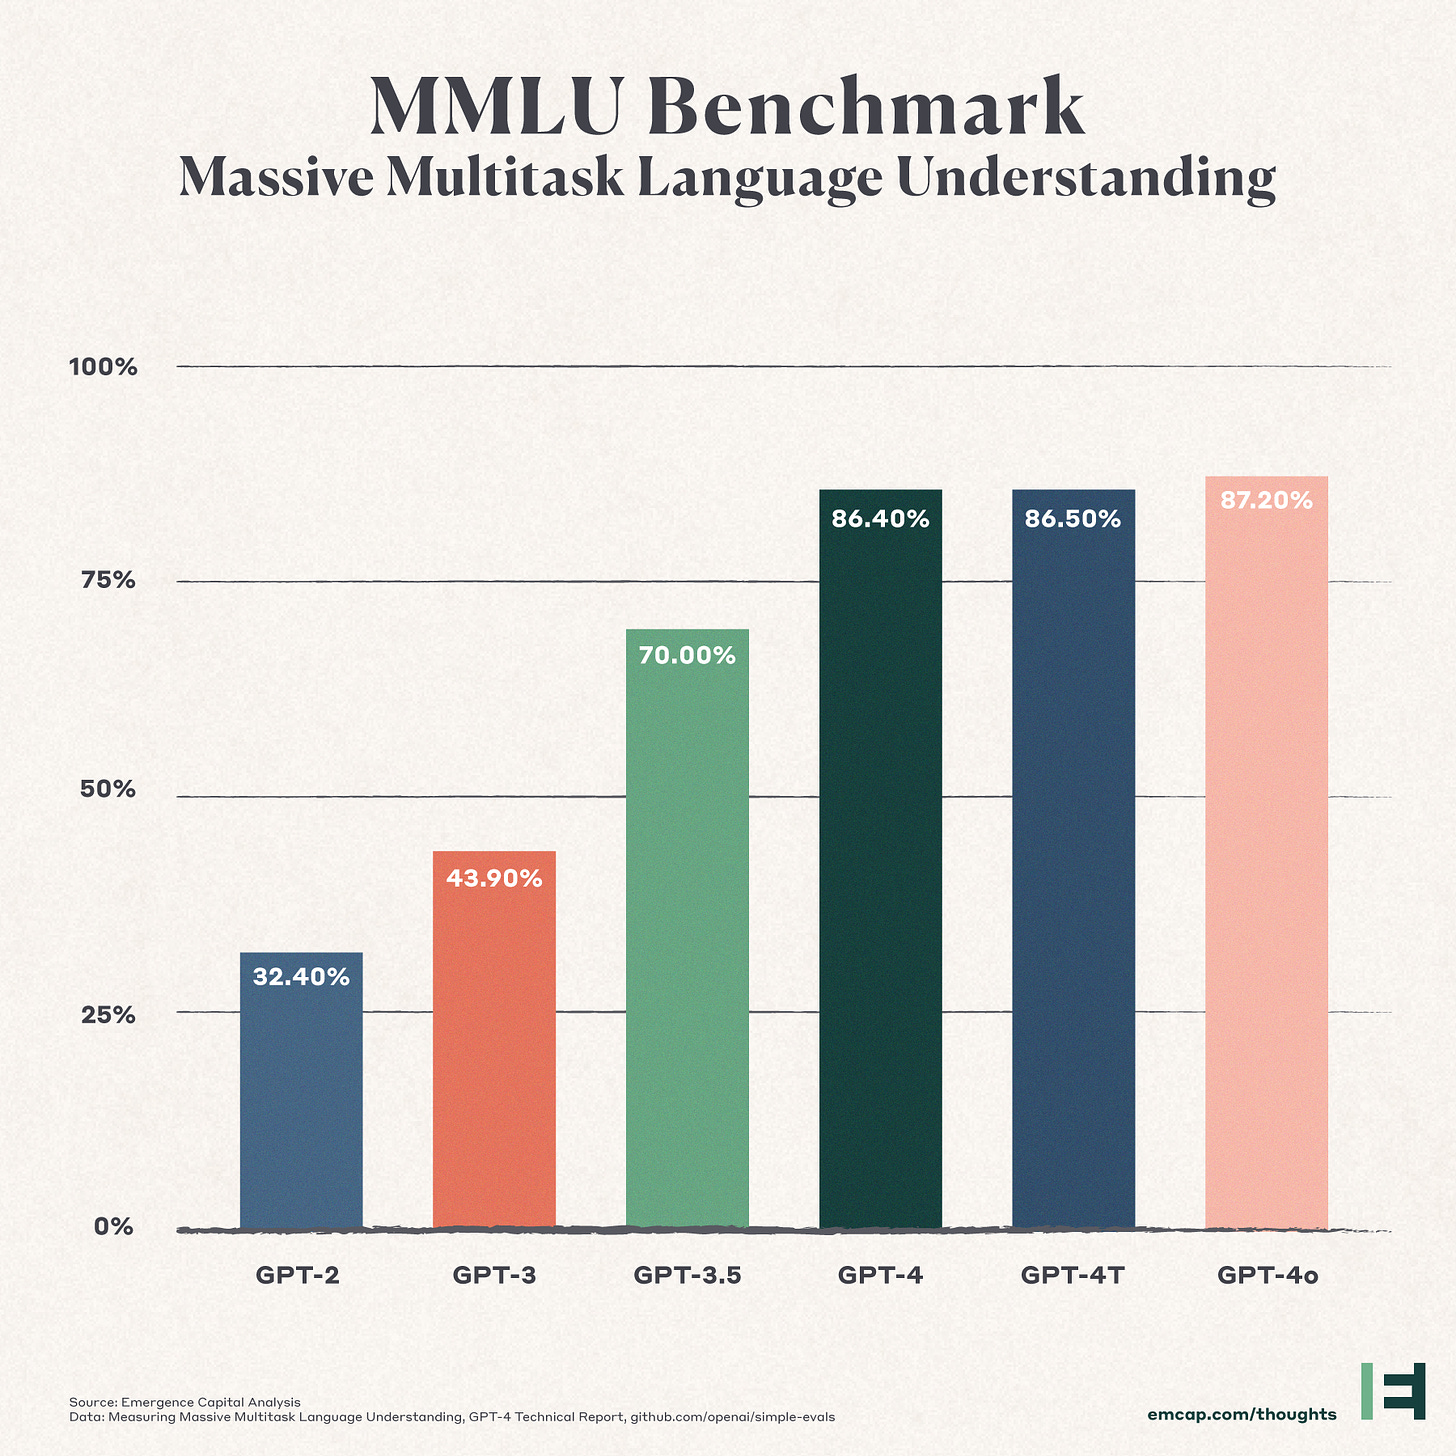 MMLU is a benchmark designed to measure knowledge across 57 subjects across STEM, the humanities, the social sciences, and more